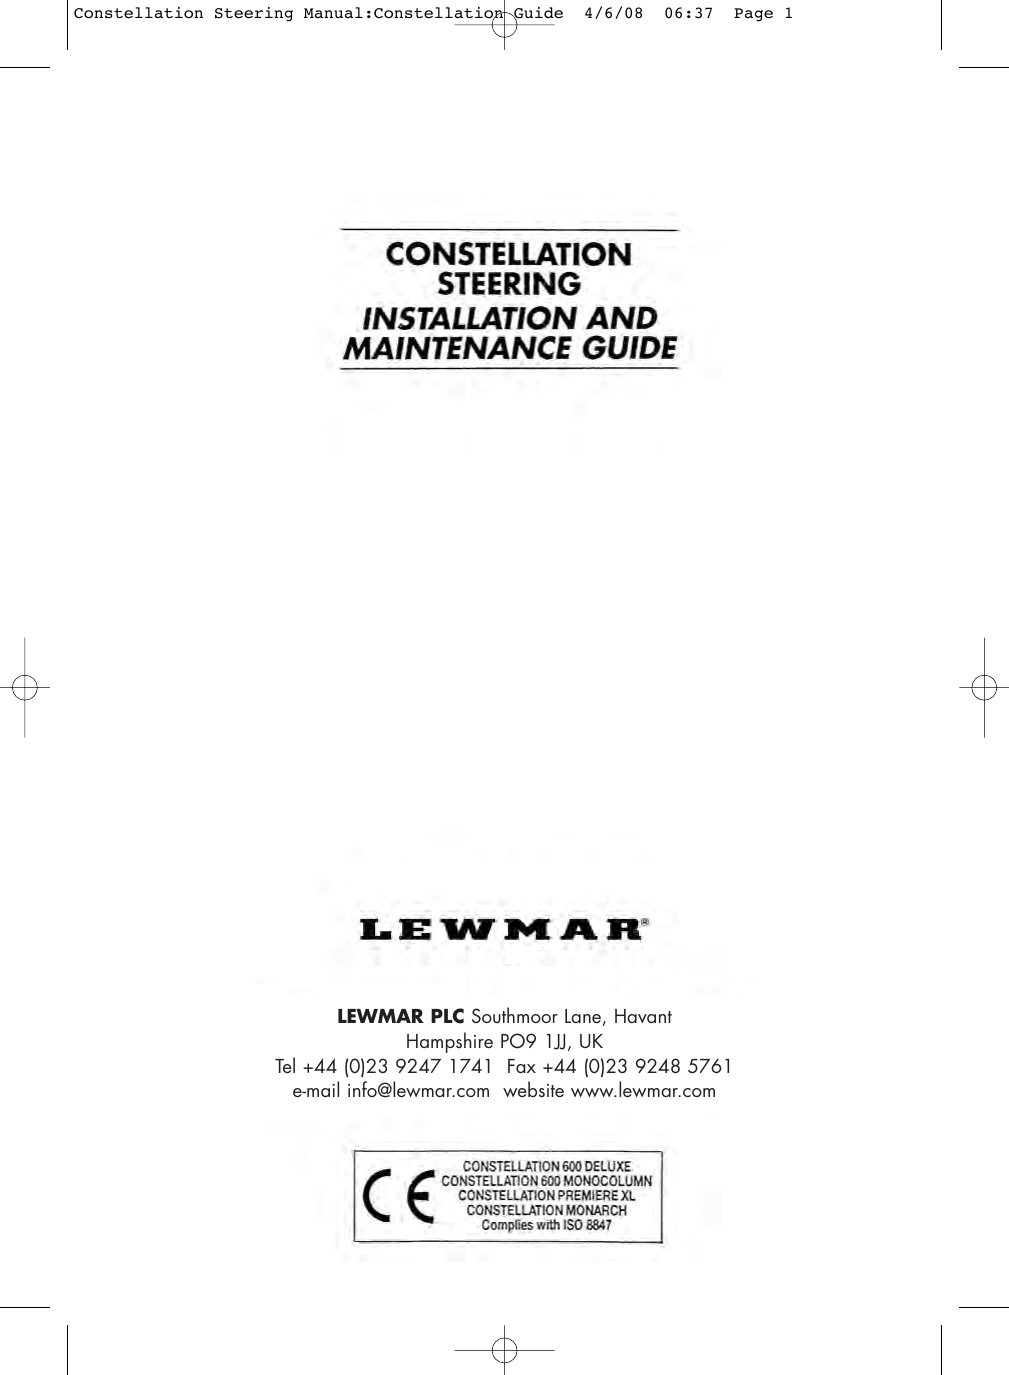 Page 1 of 8 - Constellation Steering Manual:Constellation Guide Constellation-Steering-Manual